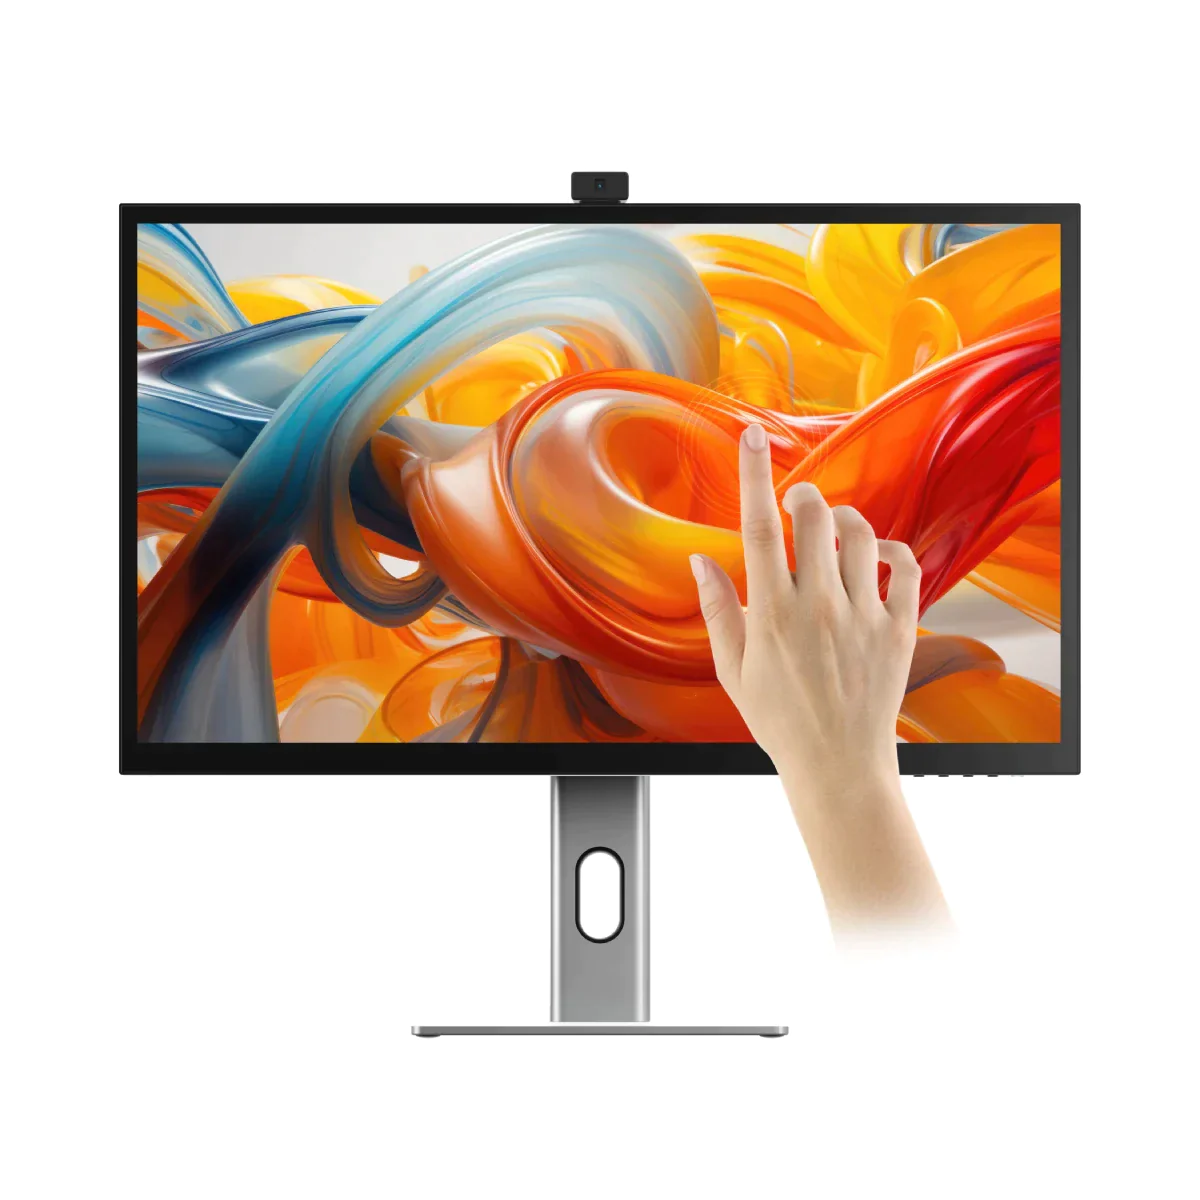 CLARITY 27" UHD 4K Monitor + Clarity Pro Touch 27" UHD 4K Monitor with 65W PD, Webcam and Touchscreen + DX2 Dual 4K Display Universal Docking Station “ with 65W Power Delivery